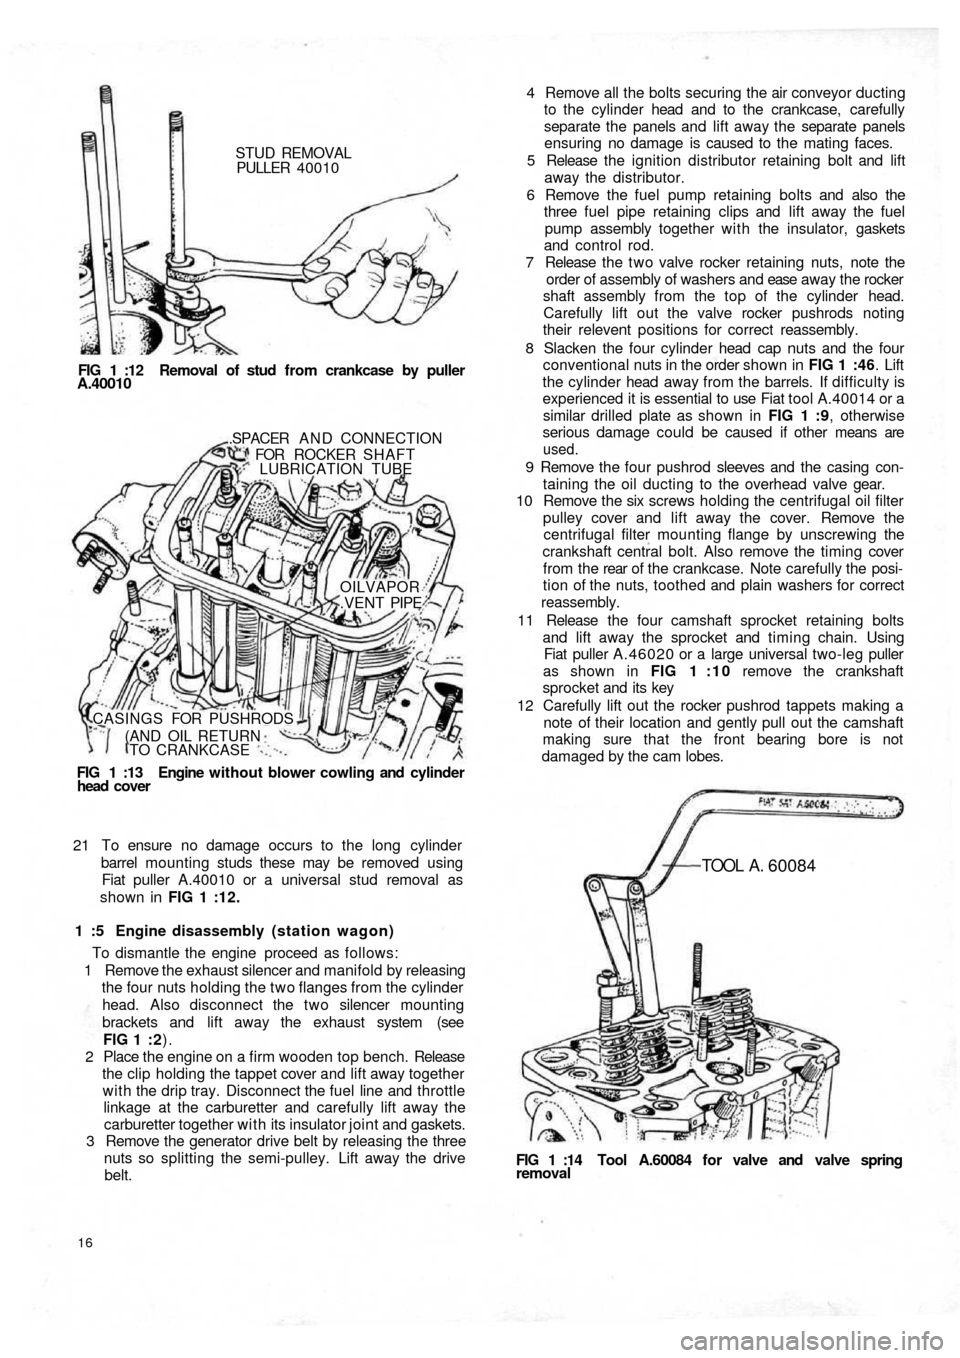 FIAT 500 1960 1.G Workshop Manual STUD REMOVAL
PULLER  40010
FIG 1 :12  Removal of stud from crankcase by puller
A.40010
FIG  1  :13   Engine  without blower cowling and cylinder
head  cover.SPACER  A N D  CONNECTION
FOR ROCKER SHAFT
